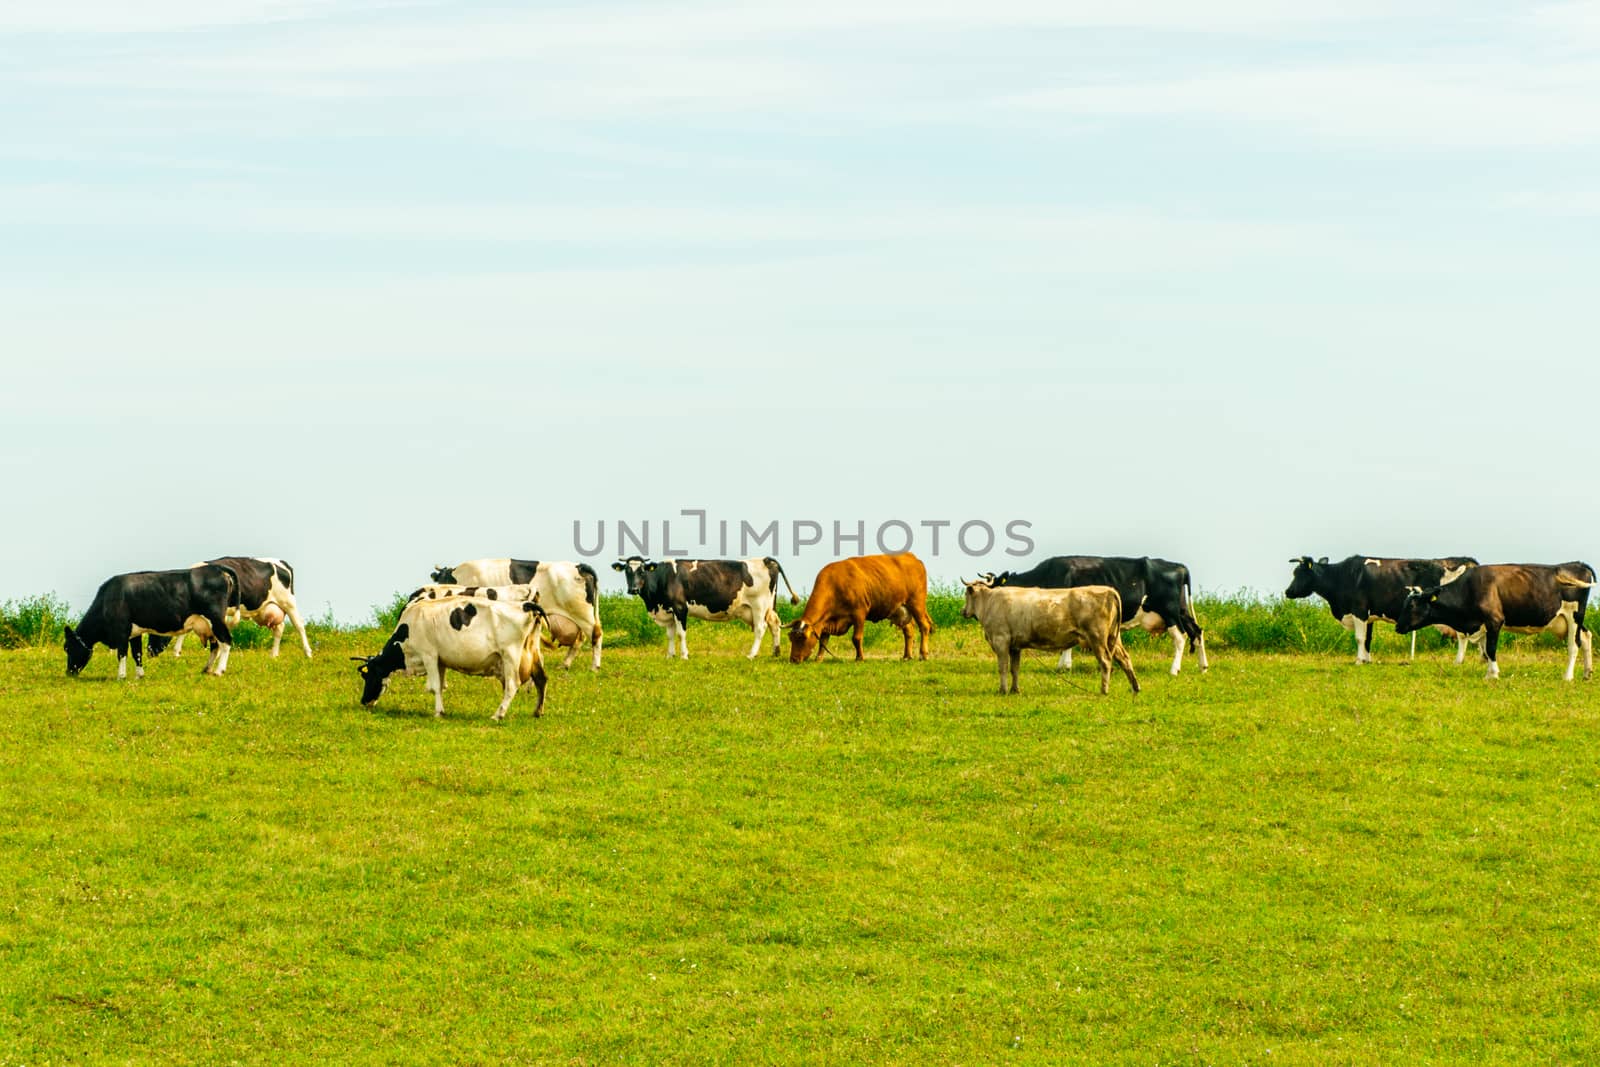 Herd of Cows Eating Grass at Summer Green Field. Cows on a Green Field.